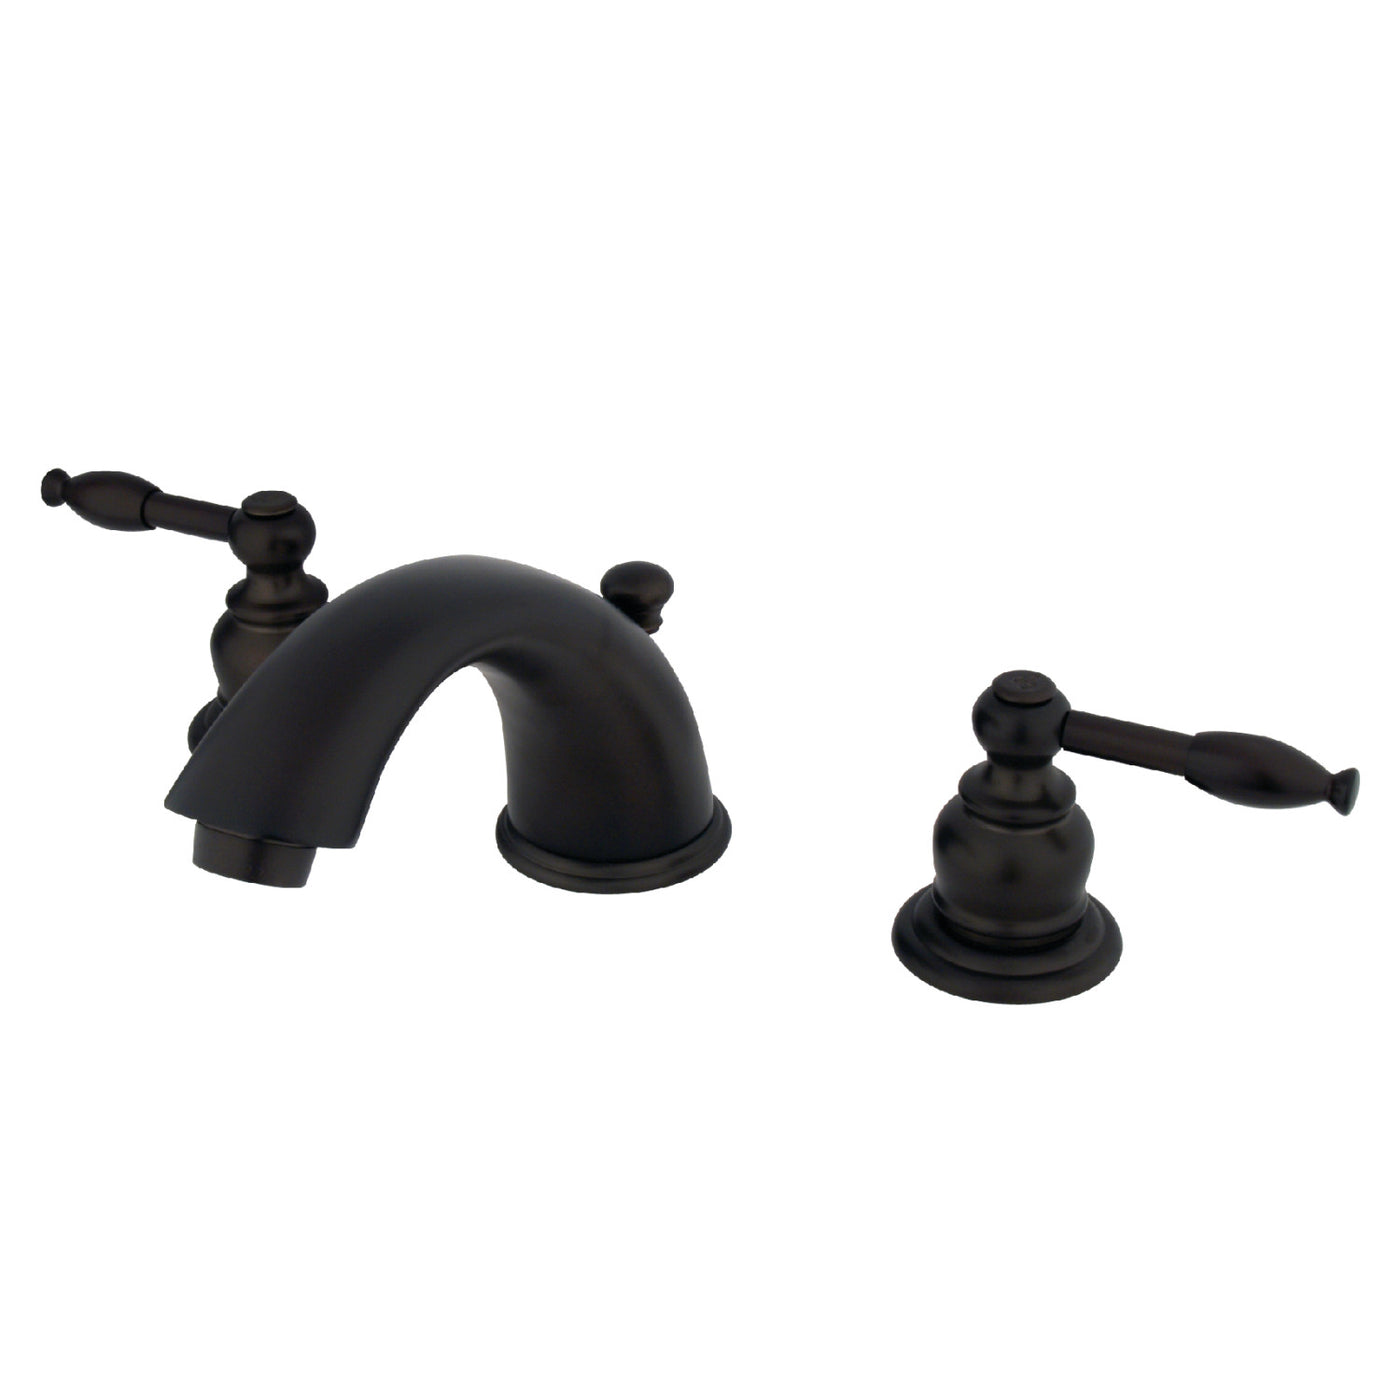 Elements of Design EB965KL Widespread Bathroom Faucet with Retail Pop-Up, Oil Rubbed Bronze